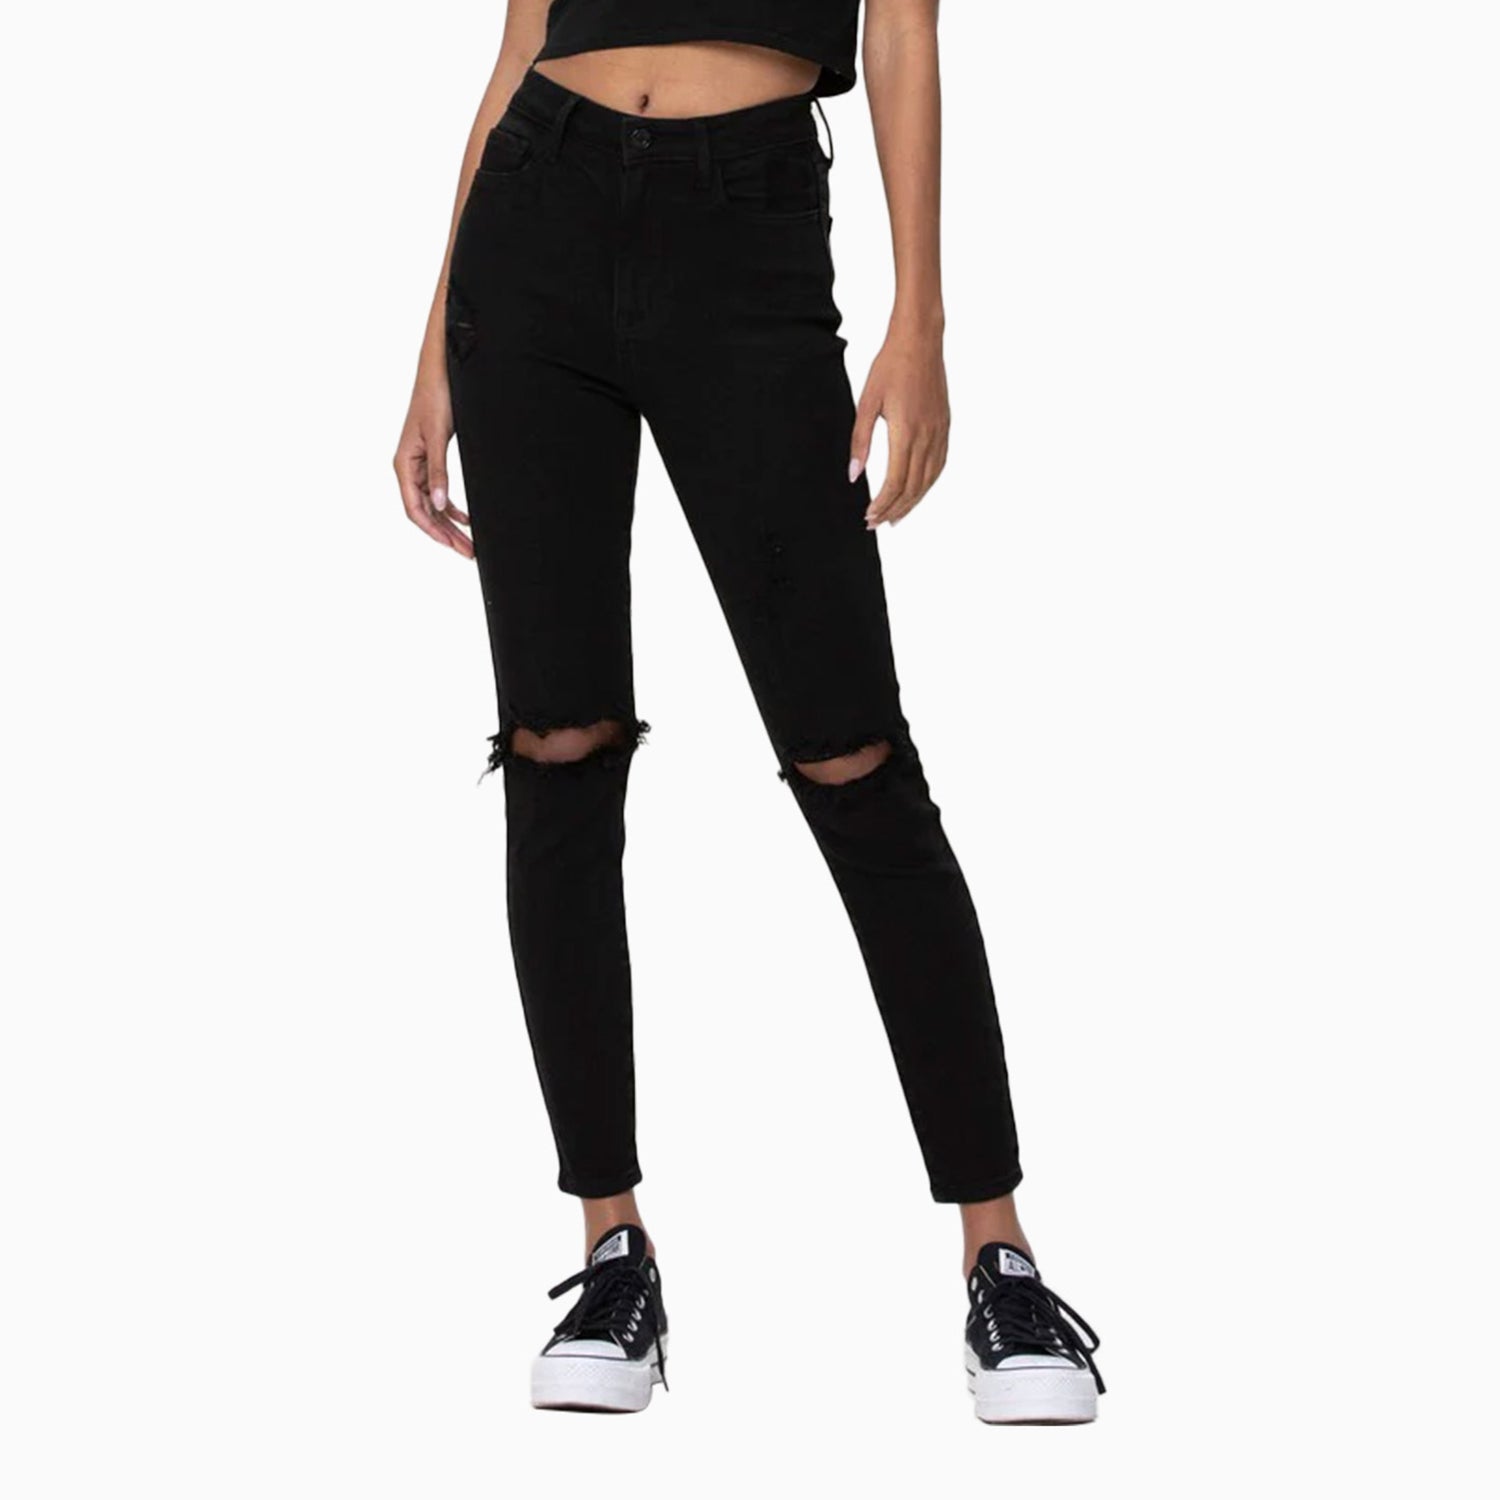 cello-jeans-womens-high-rise-distress-ankle-skinny-pant-wv17594blk